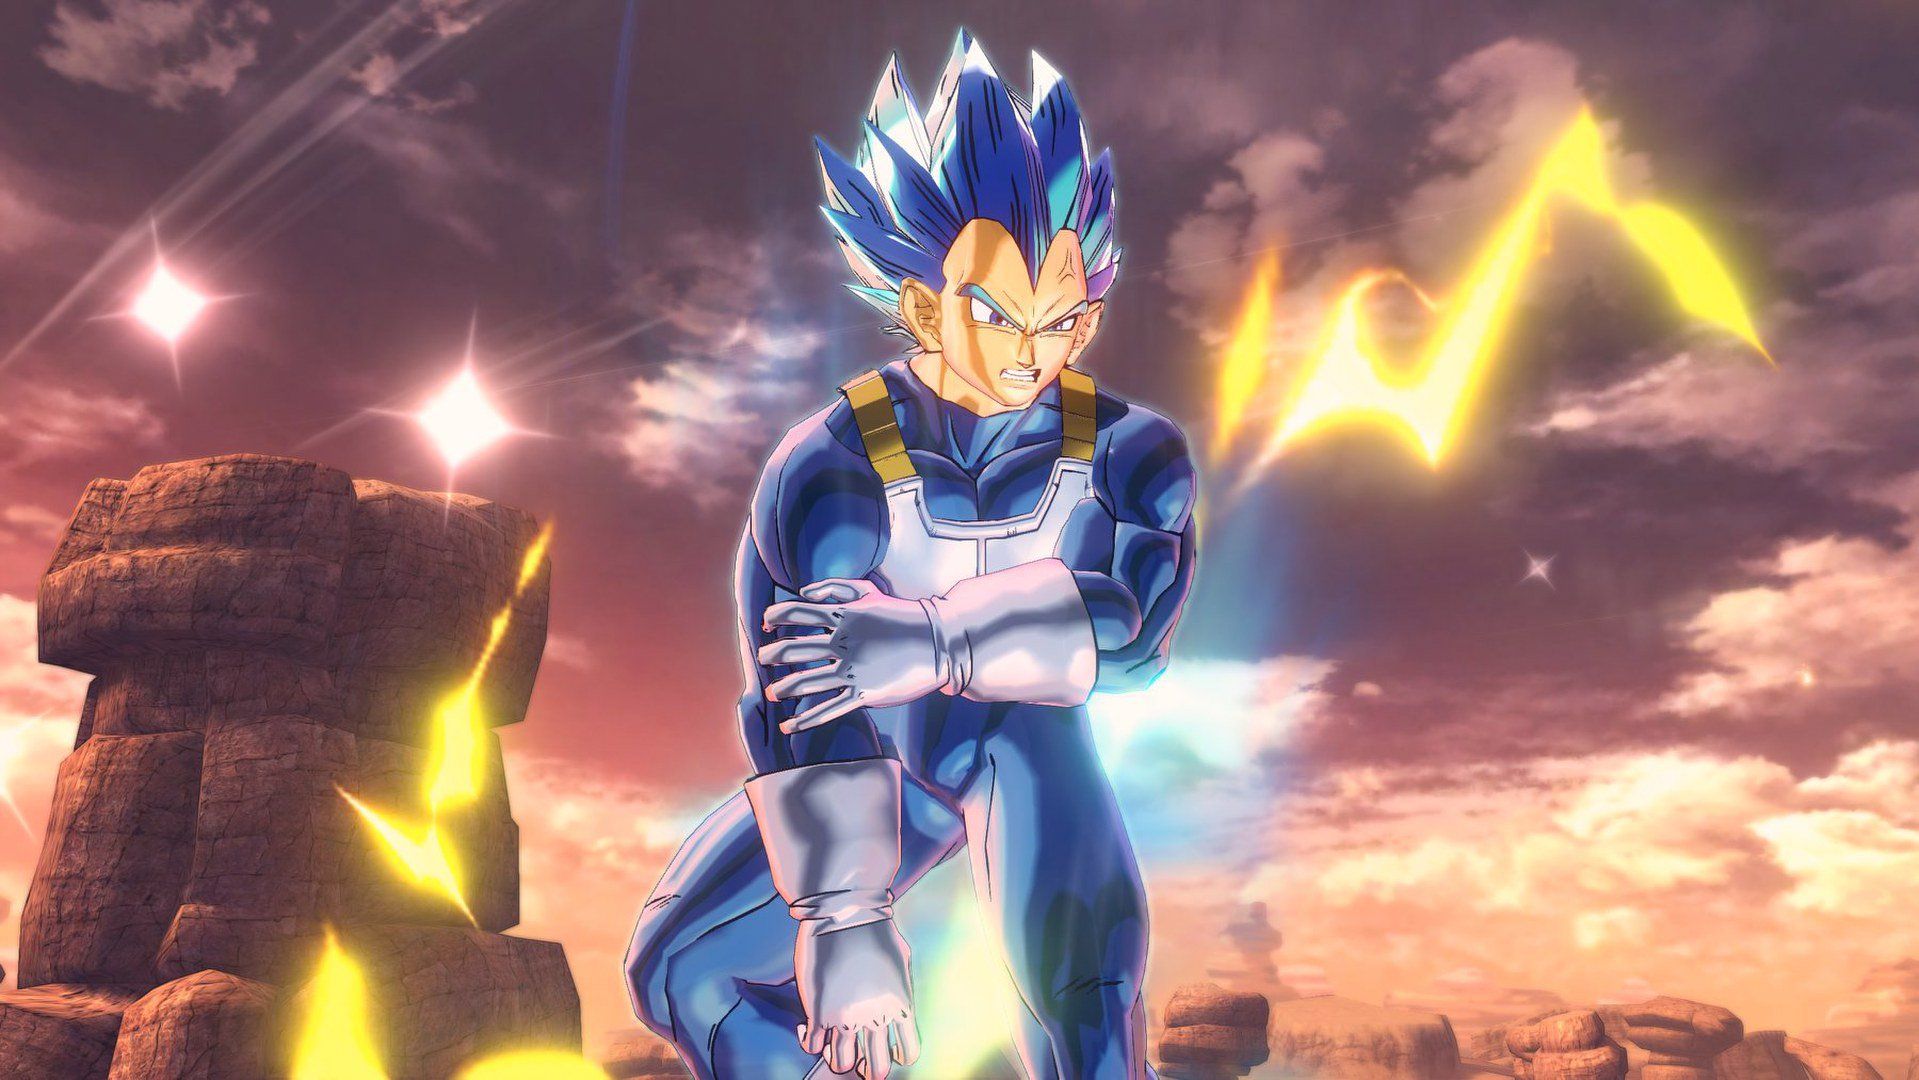 Dragon Ball Xenoverse 2: Here Are the First Image of Vegeta Super Saiyan Blue Evolution. Play Crazy Game